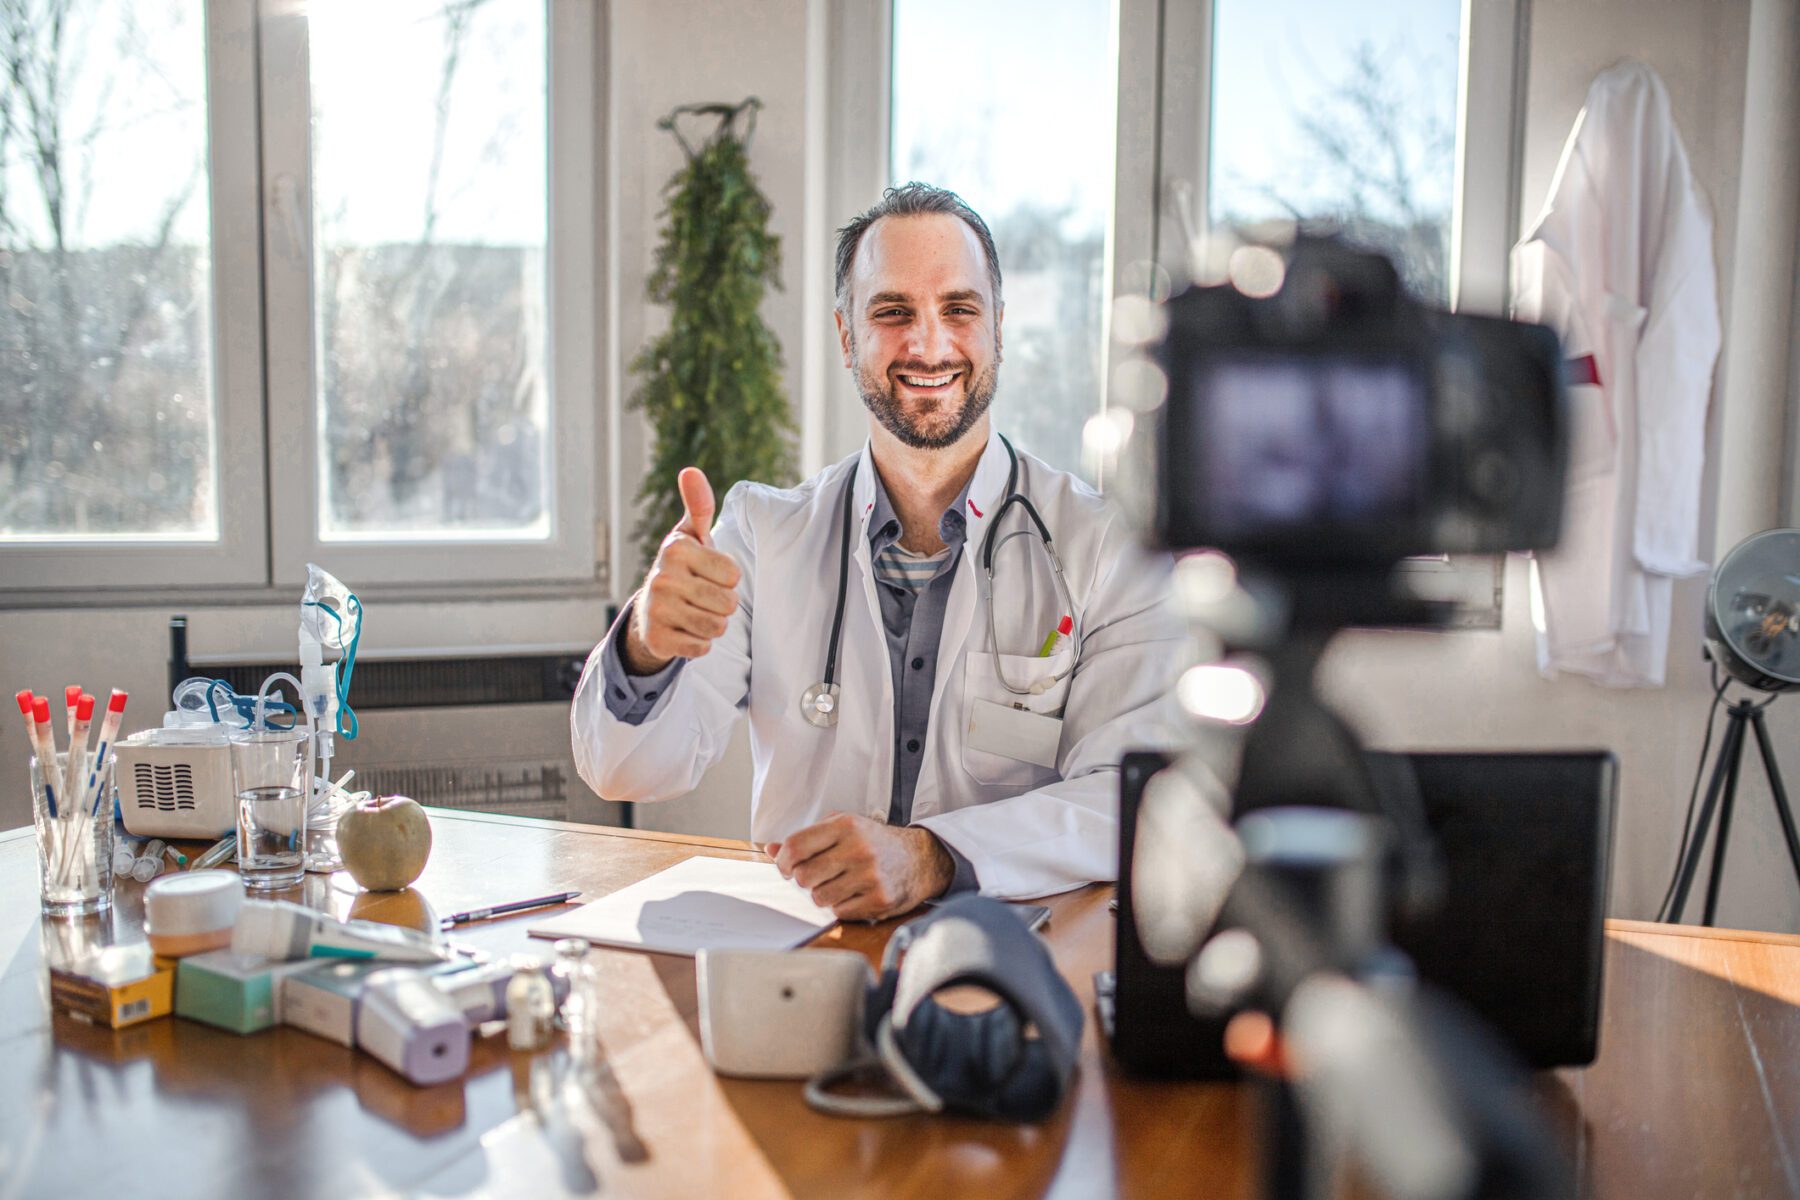 5 Video Marketing Trends for Healthcare in 2023